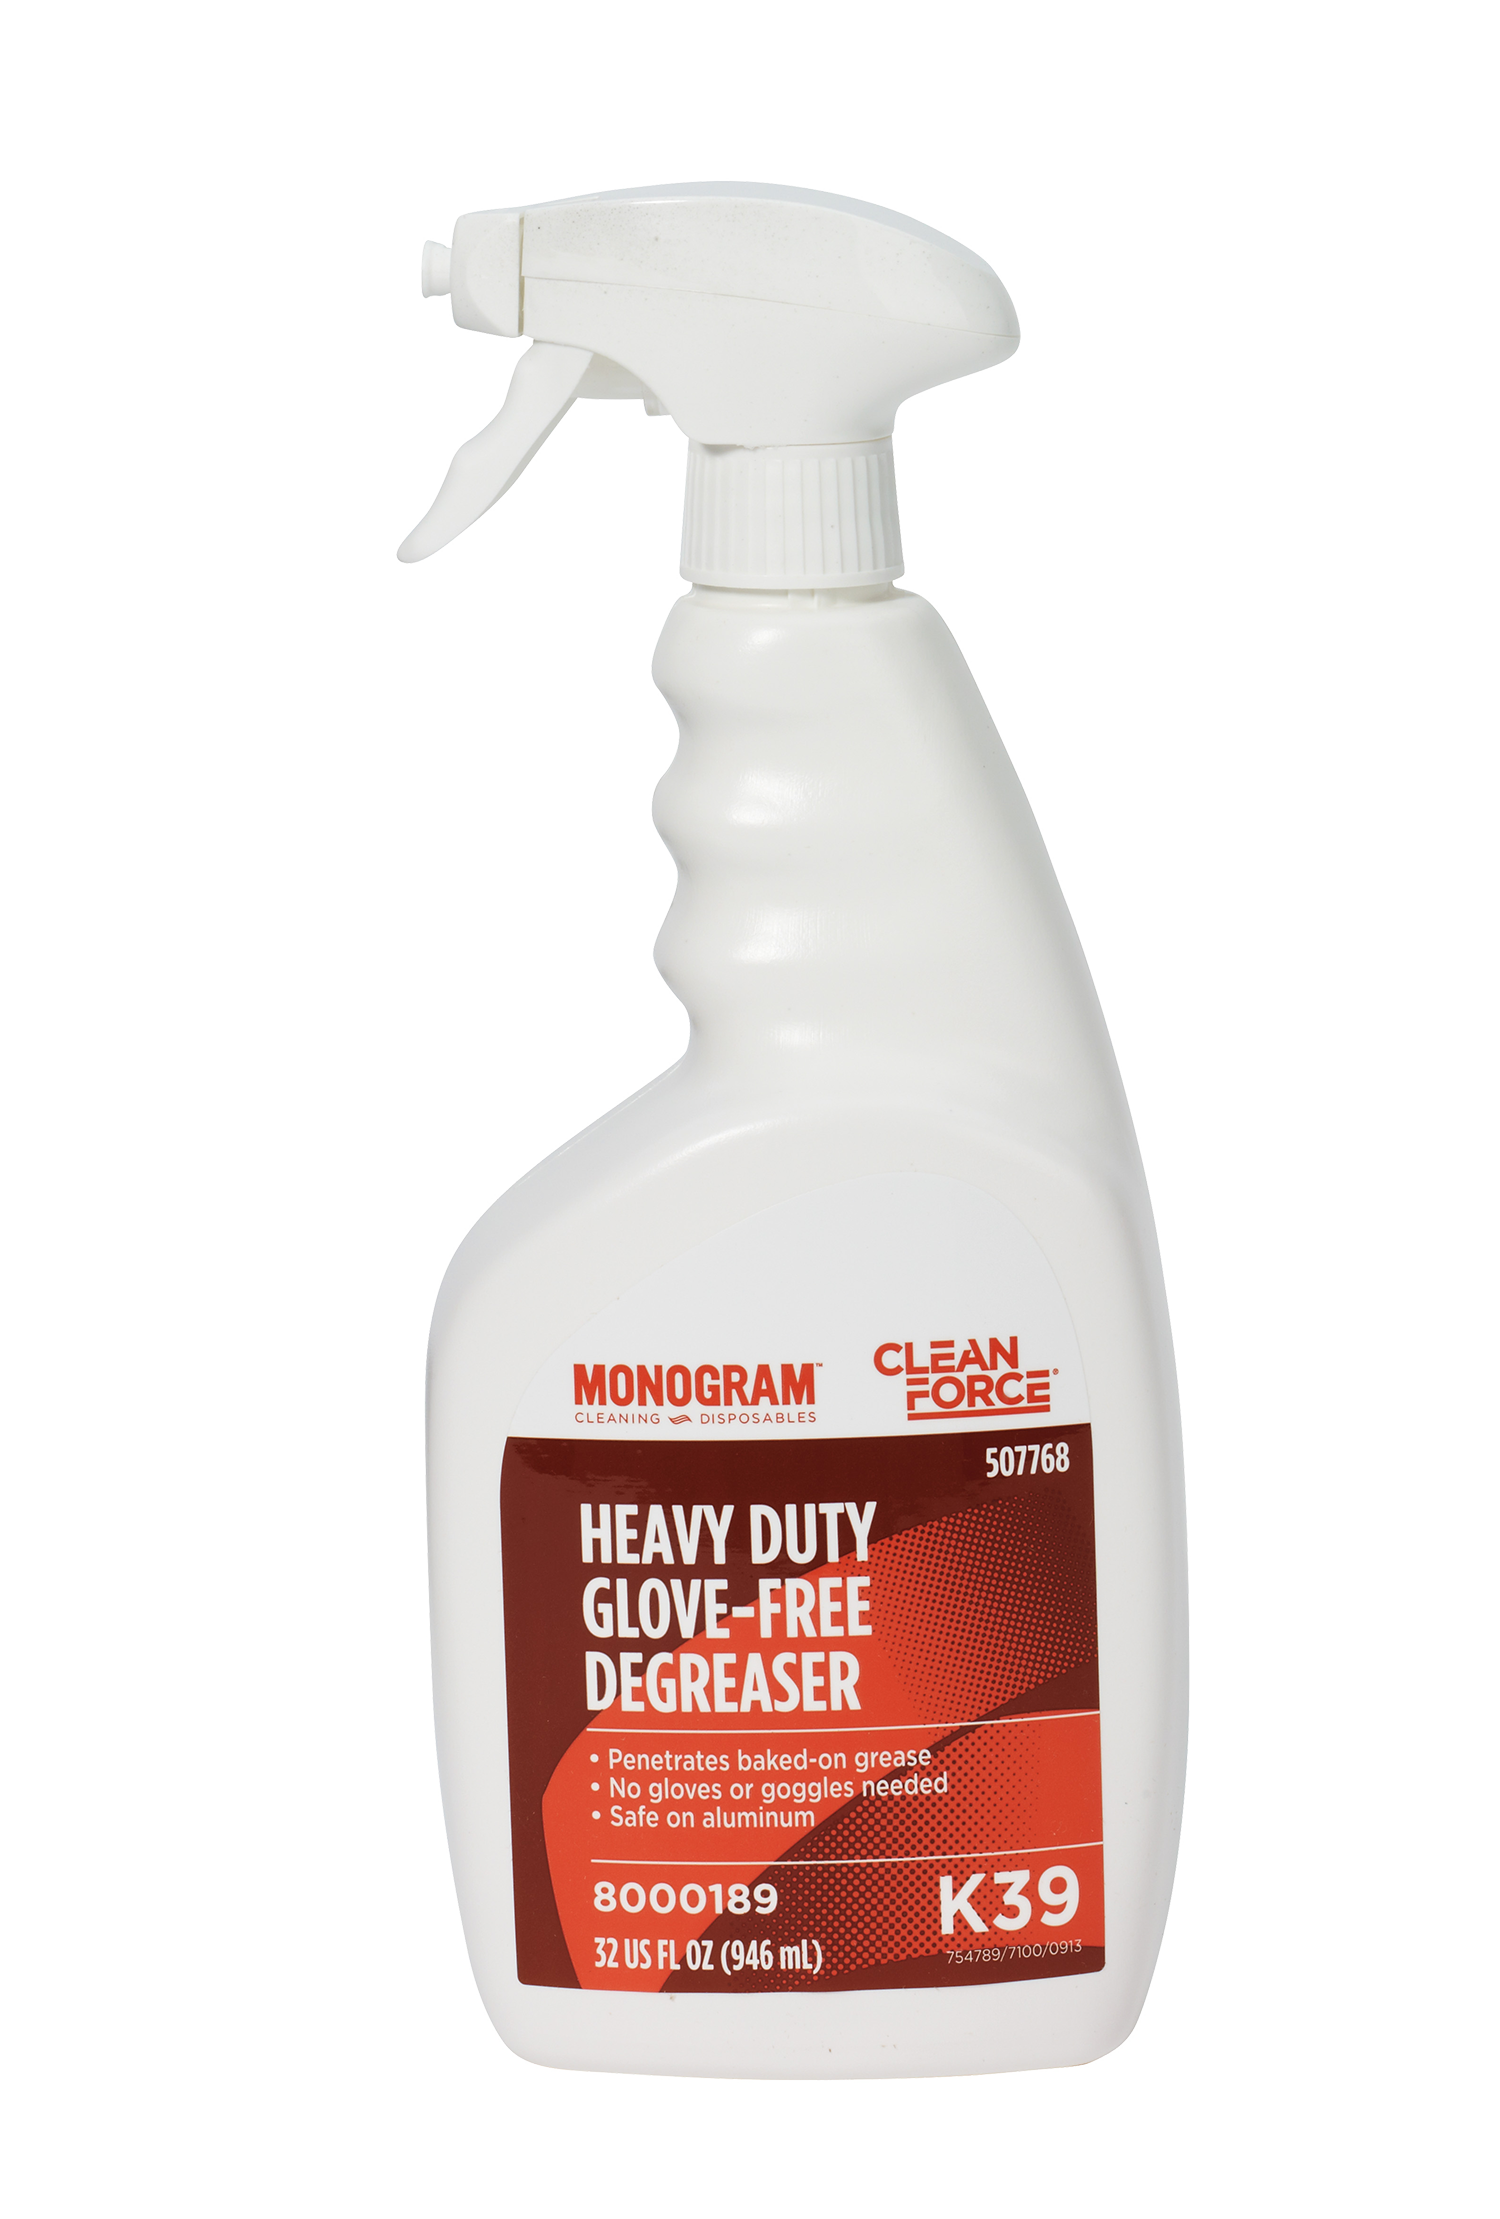 Grip Clean | Degreaser Cleaner Heavy Duty - Multipurpose Cleaner For  Garage/Shop & Home Use | Non-Corrosive Grease Cleaner, Concrete Cleaner,  Chain